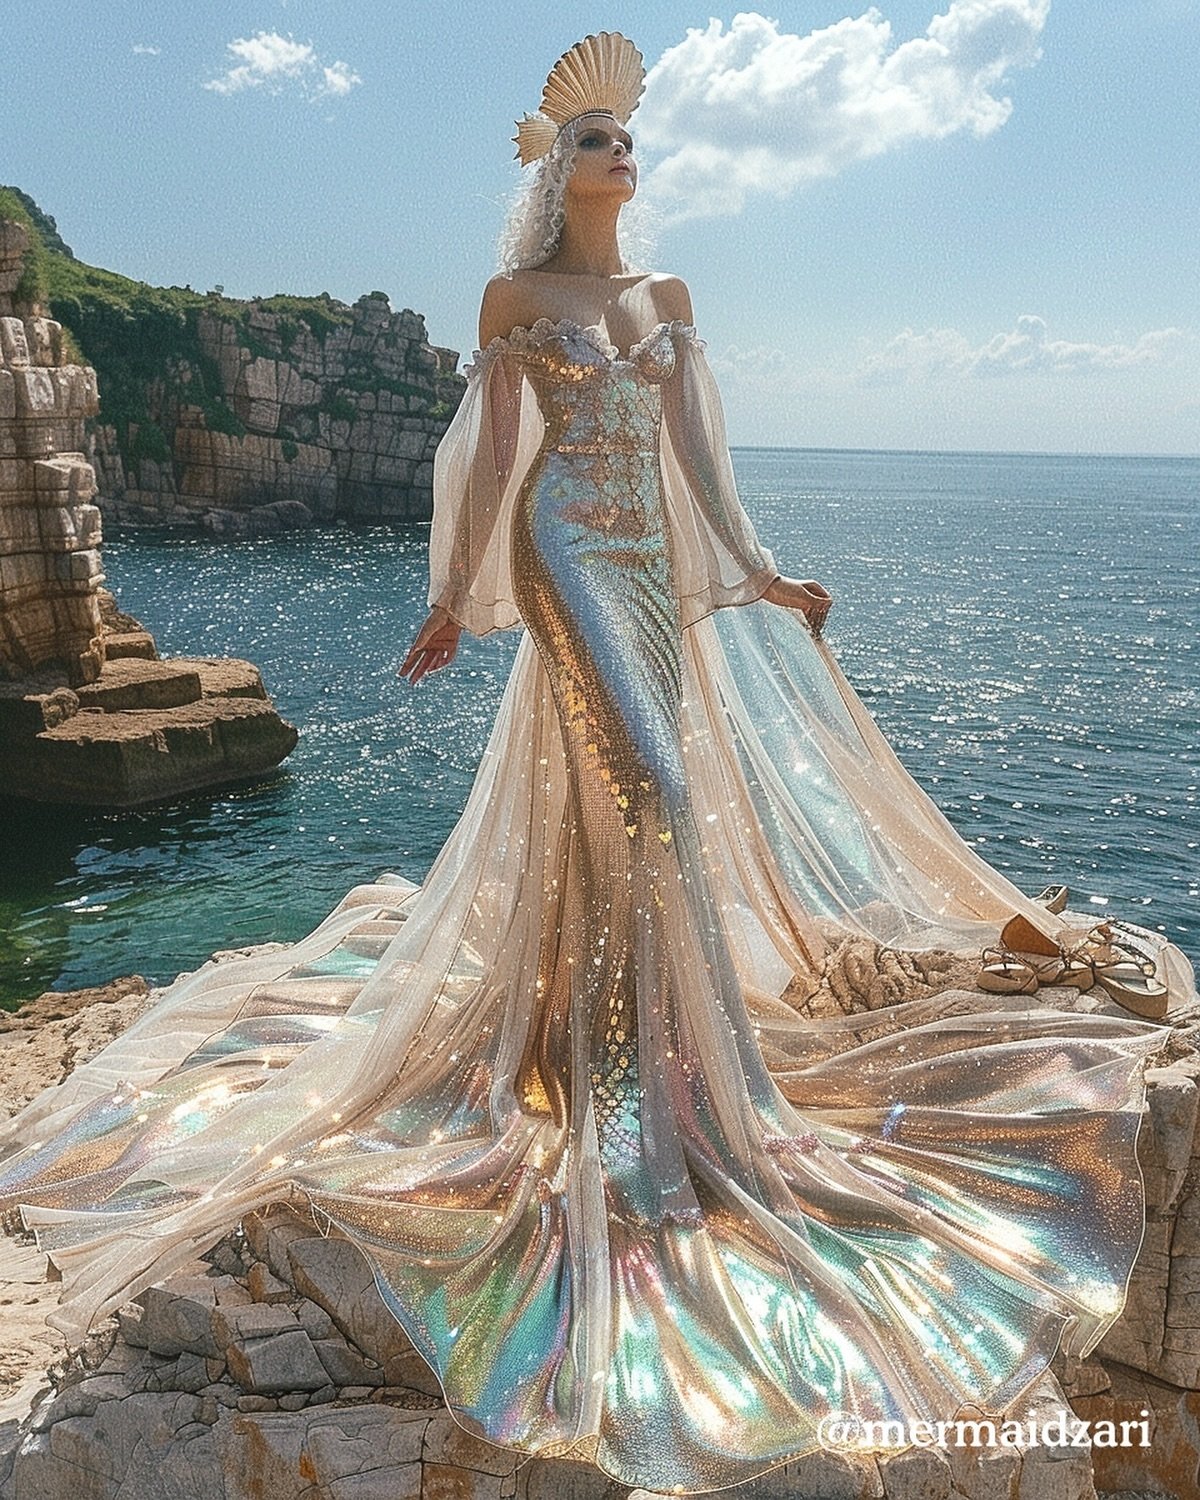 Just mermaid goddess vibes for day 2 of MerMay!

I love all of the shiny materials 🥰

✨Designed by @mermaidzari in Photoshop (digital edit /CGI 3D edit) and Midjourney AI with lots of editing in Procreate with my iPad Pro 🖥️
.⁣
.⁣
.⁣
.⁣

#fantasyph